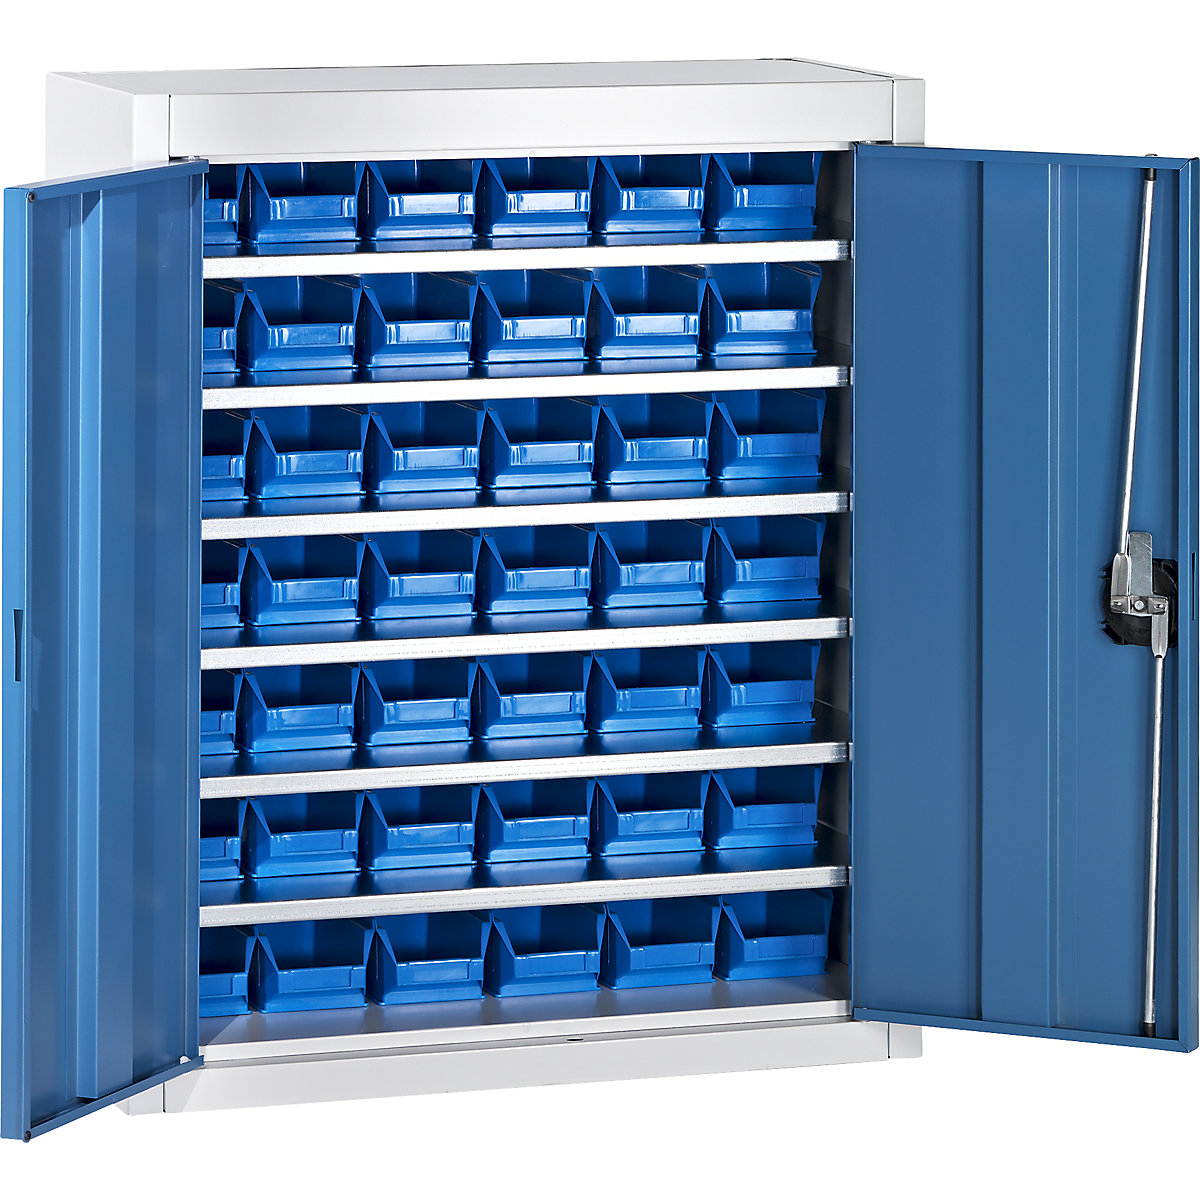 Storage cupboard with open fronted storage bins – mauser, HxWxD 820 x 680 x 280 mm, two-colour, grey body, blue doors, 42 bins-3